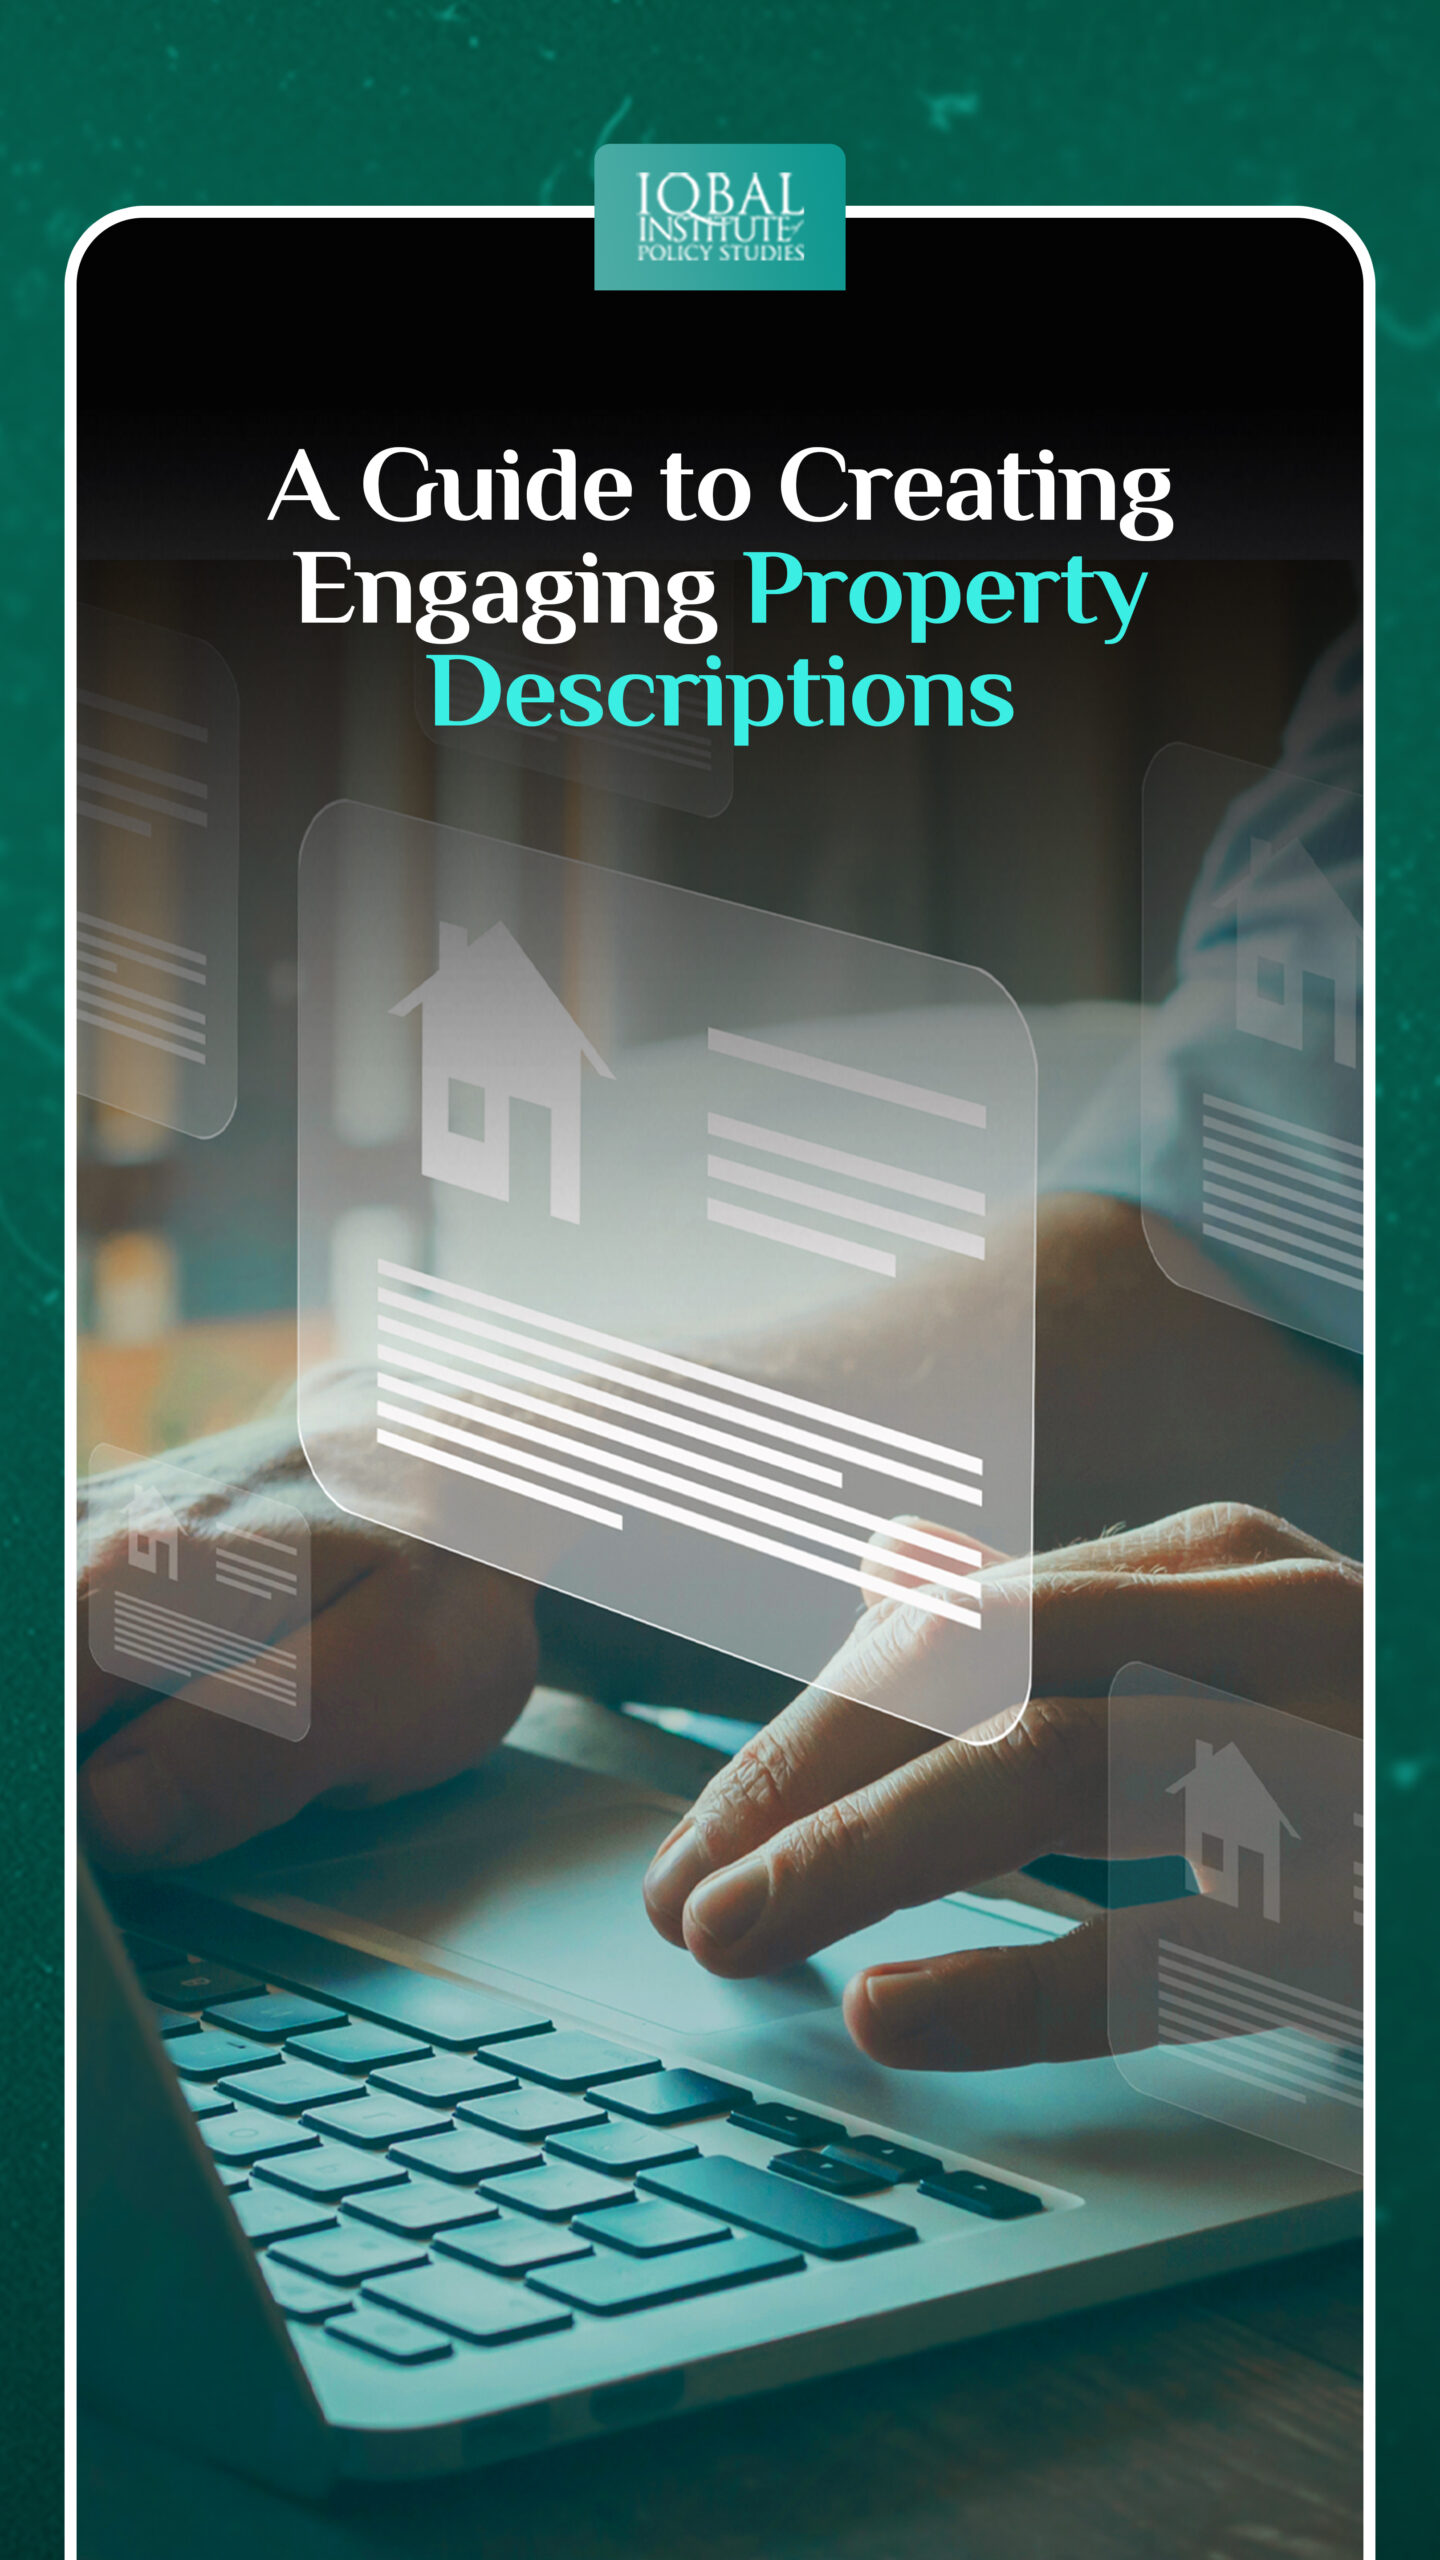 A Guide to Creating Engaging Property Descriptions